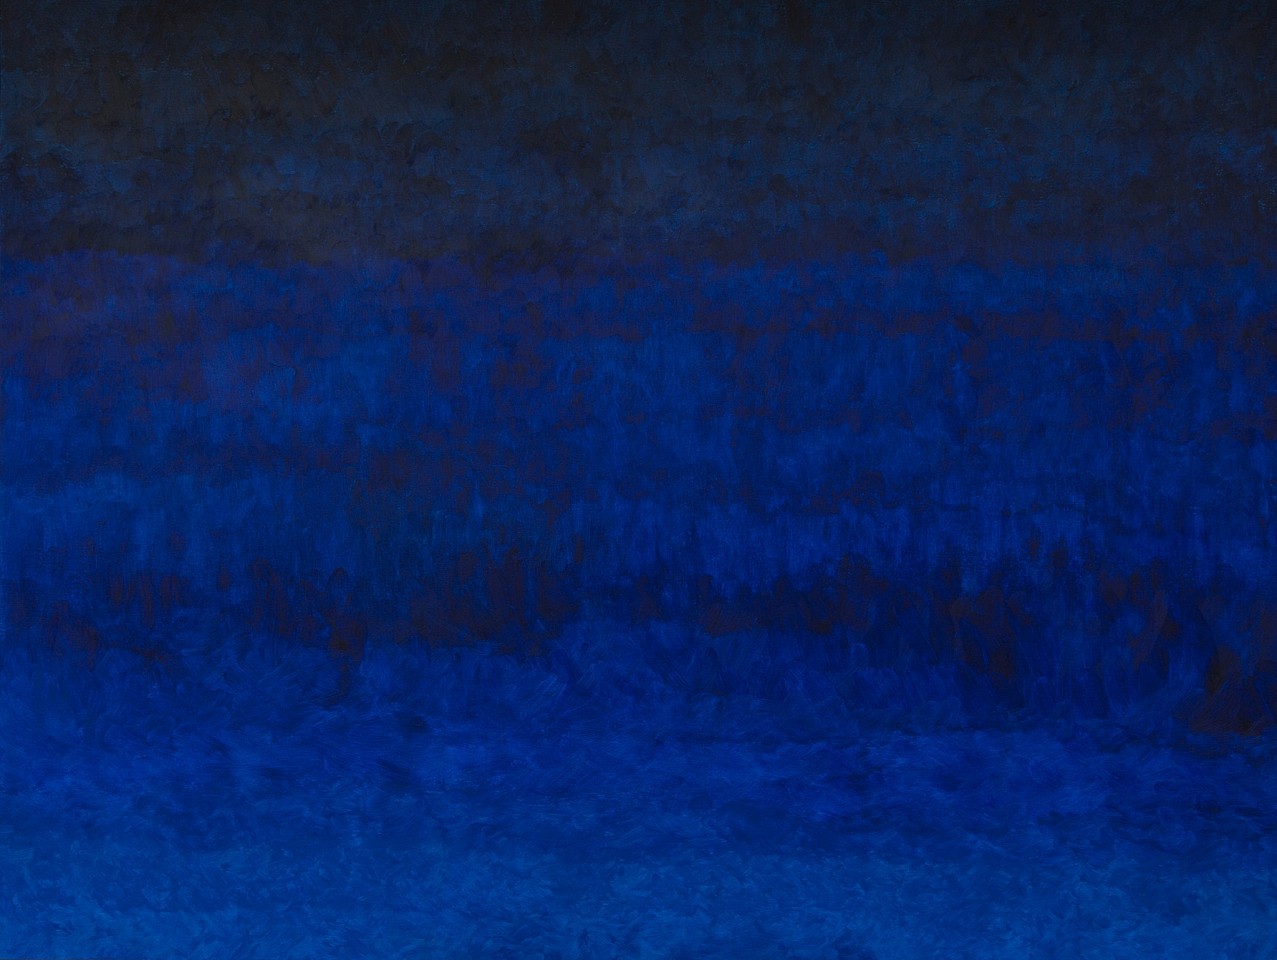 Janet Rogers, Blue Dimensions, 2014
Encaustic on Canvas, 48 x 64 in.
ROGE00085